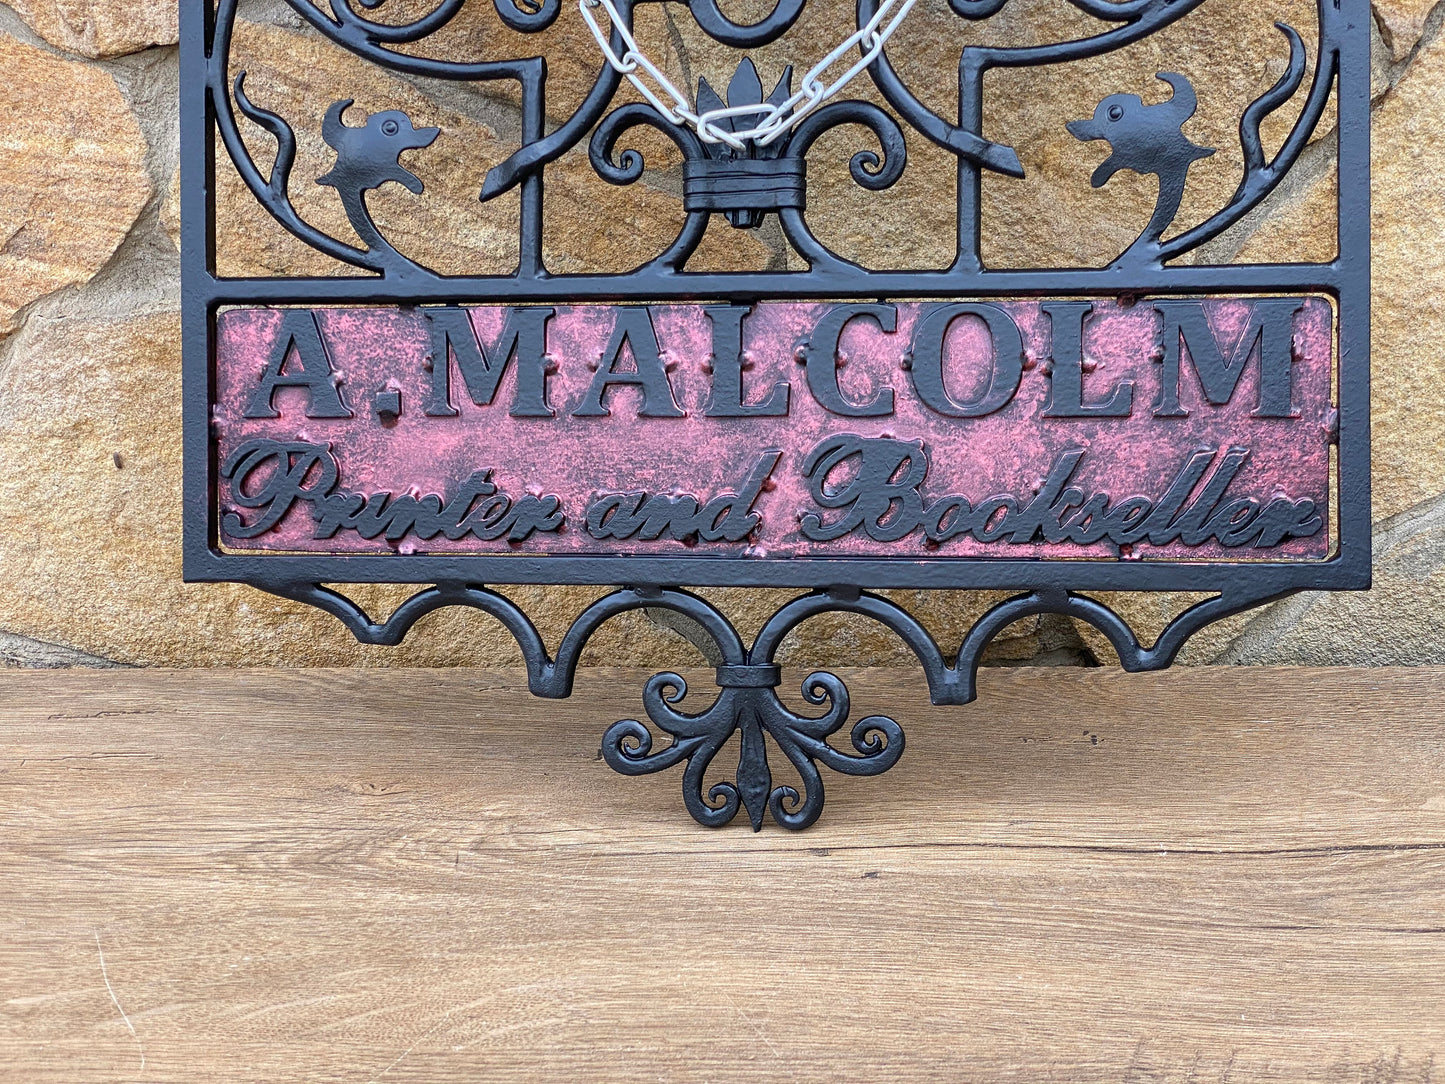 Vintage plaque, vintage, hand forged plaque, address sign, restaurant, caffe, personalized plaque, initials, family sign, personalized sign